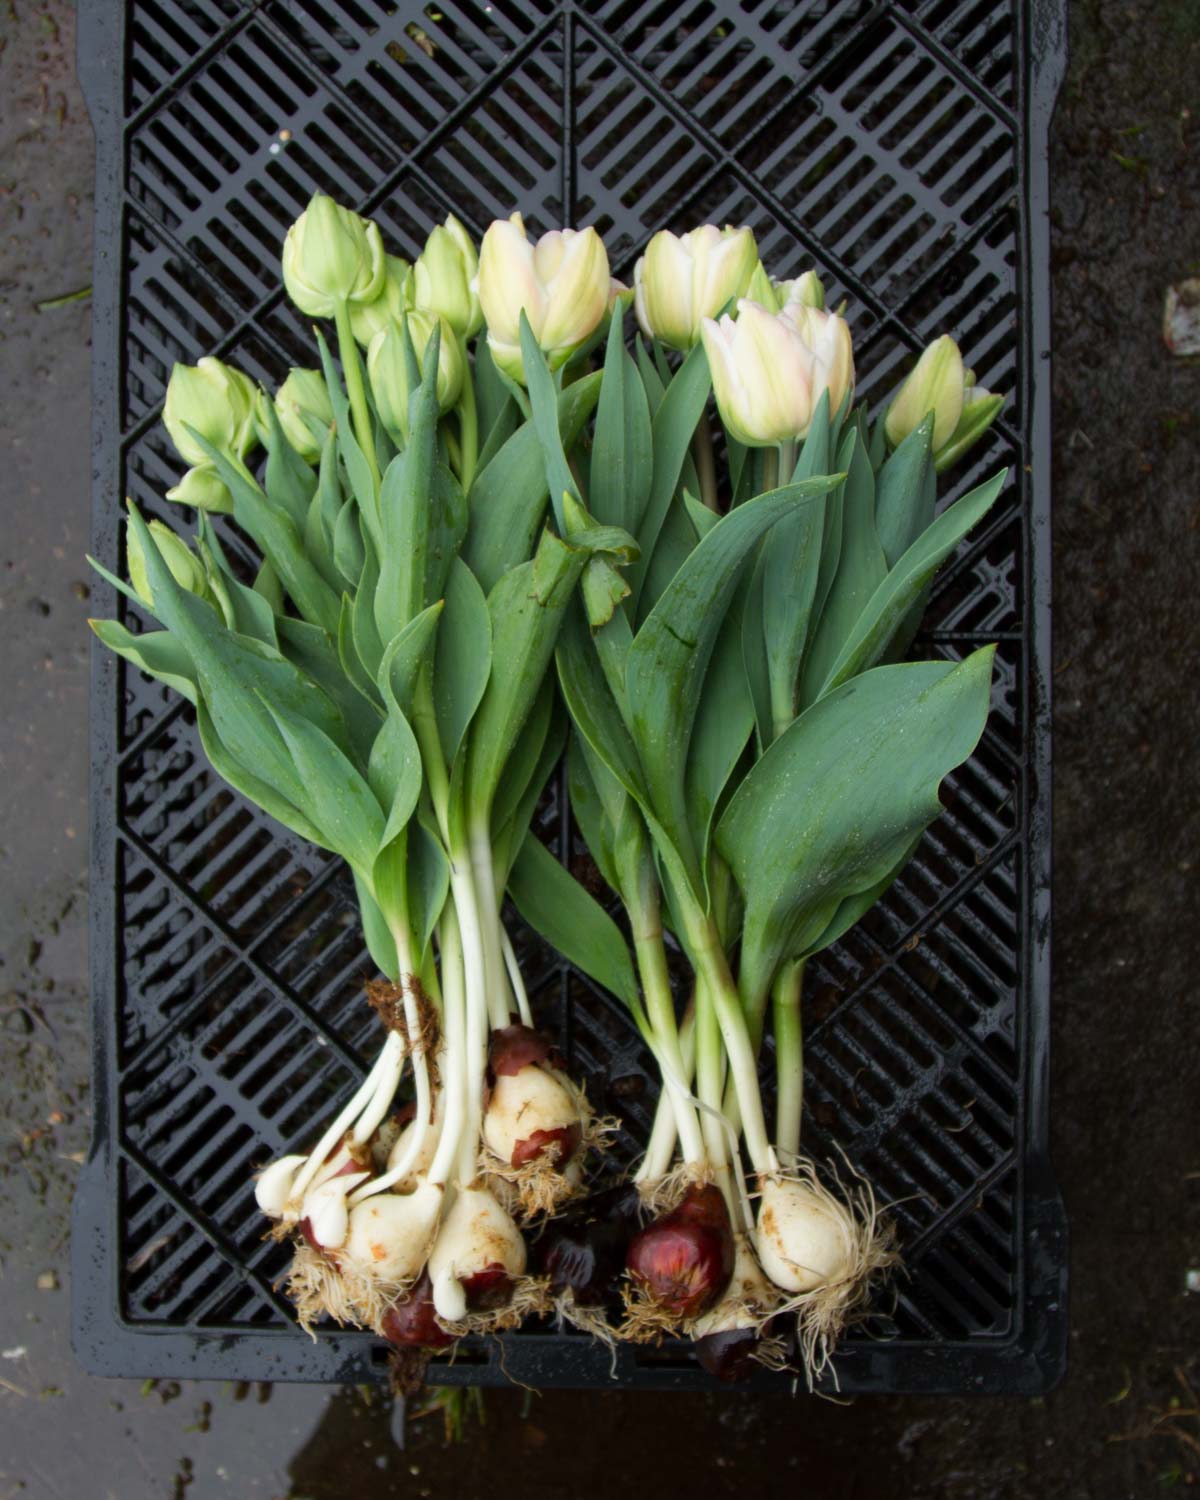 Harvesting Foxtrot Tulips with their bulbs on - for cut flowers